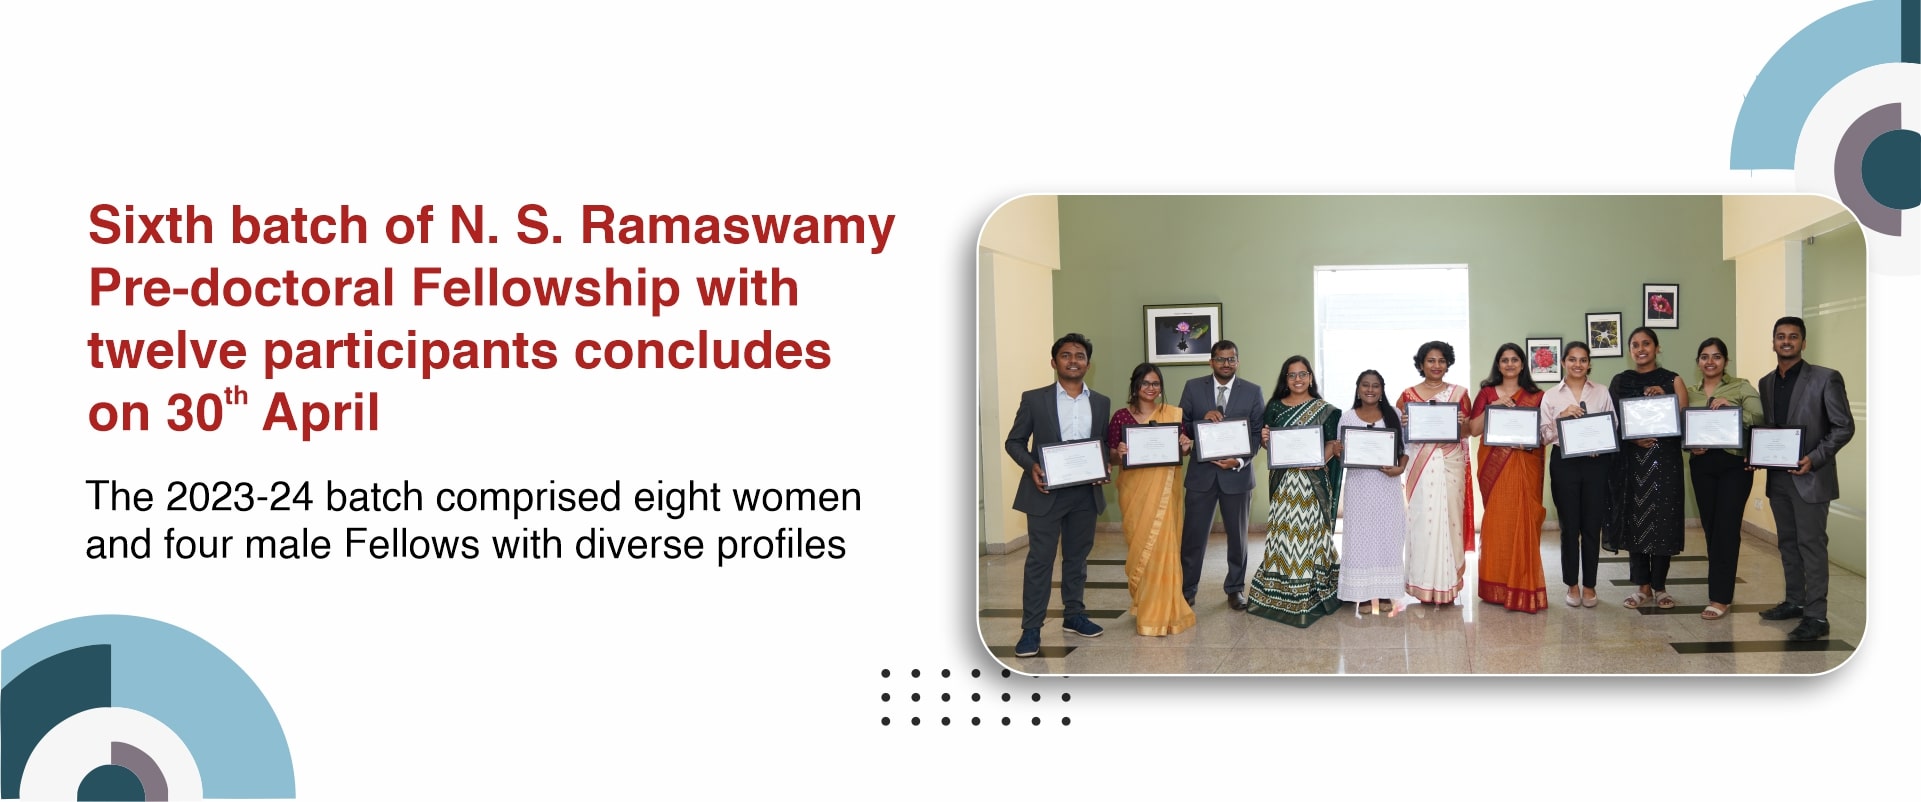 Sixth batch of N. S. Ramaswamy Pre-doctoral Fellowship with twelve participants concludes on 30th April